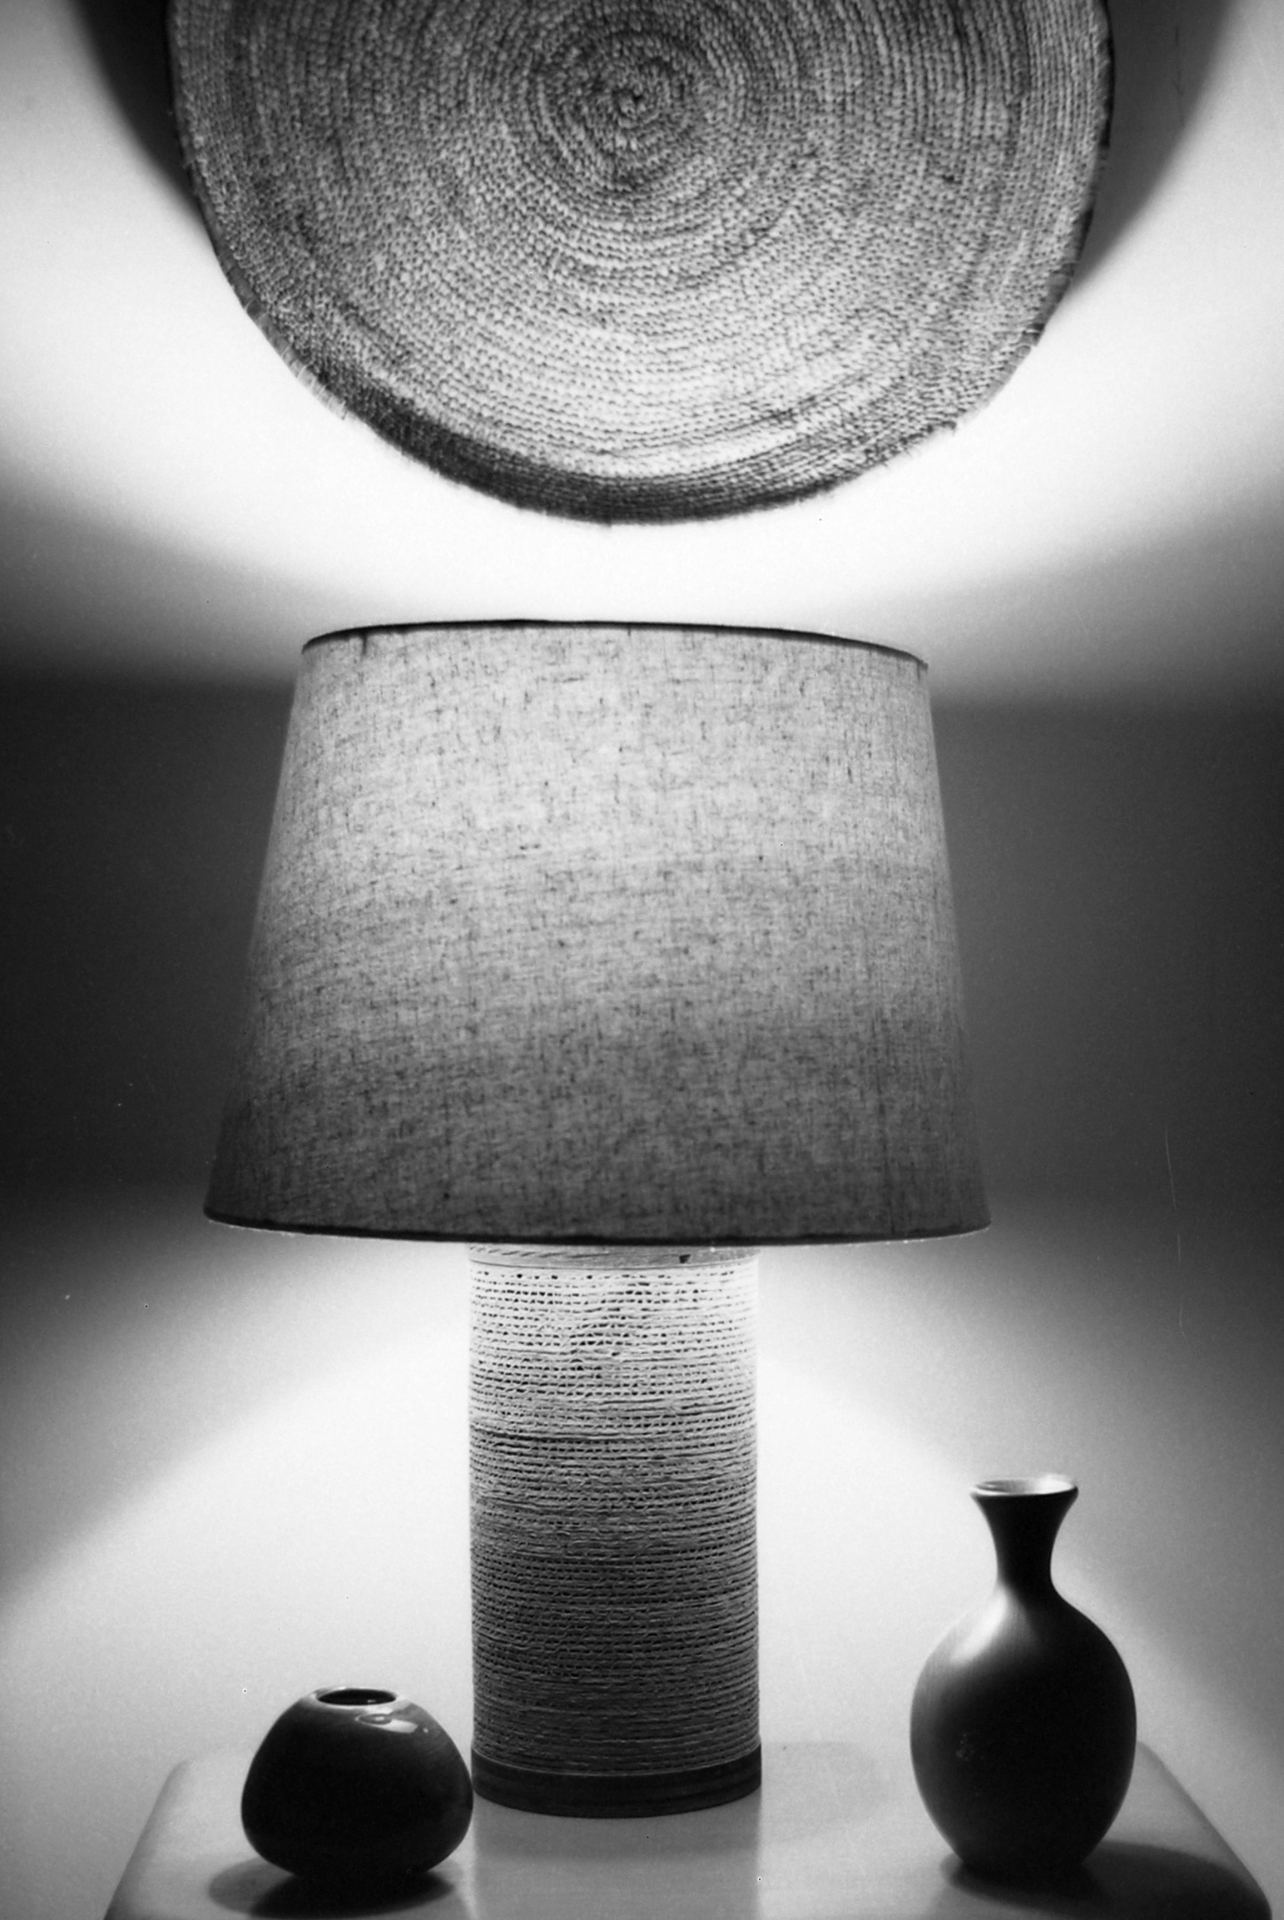 Lamp and two vases